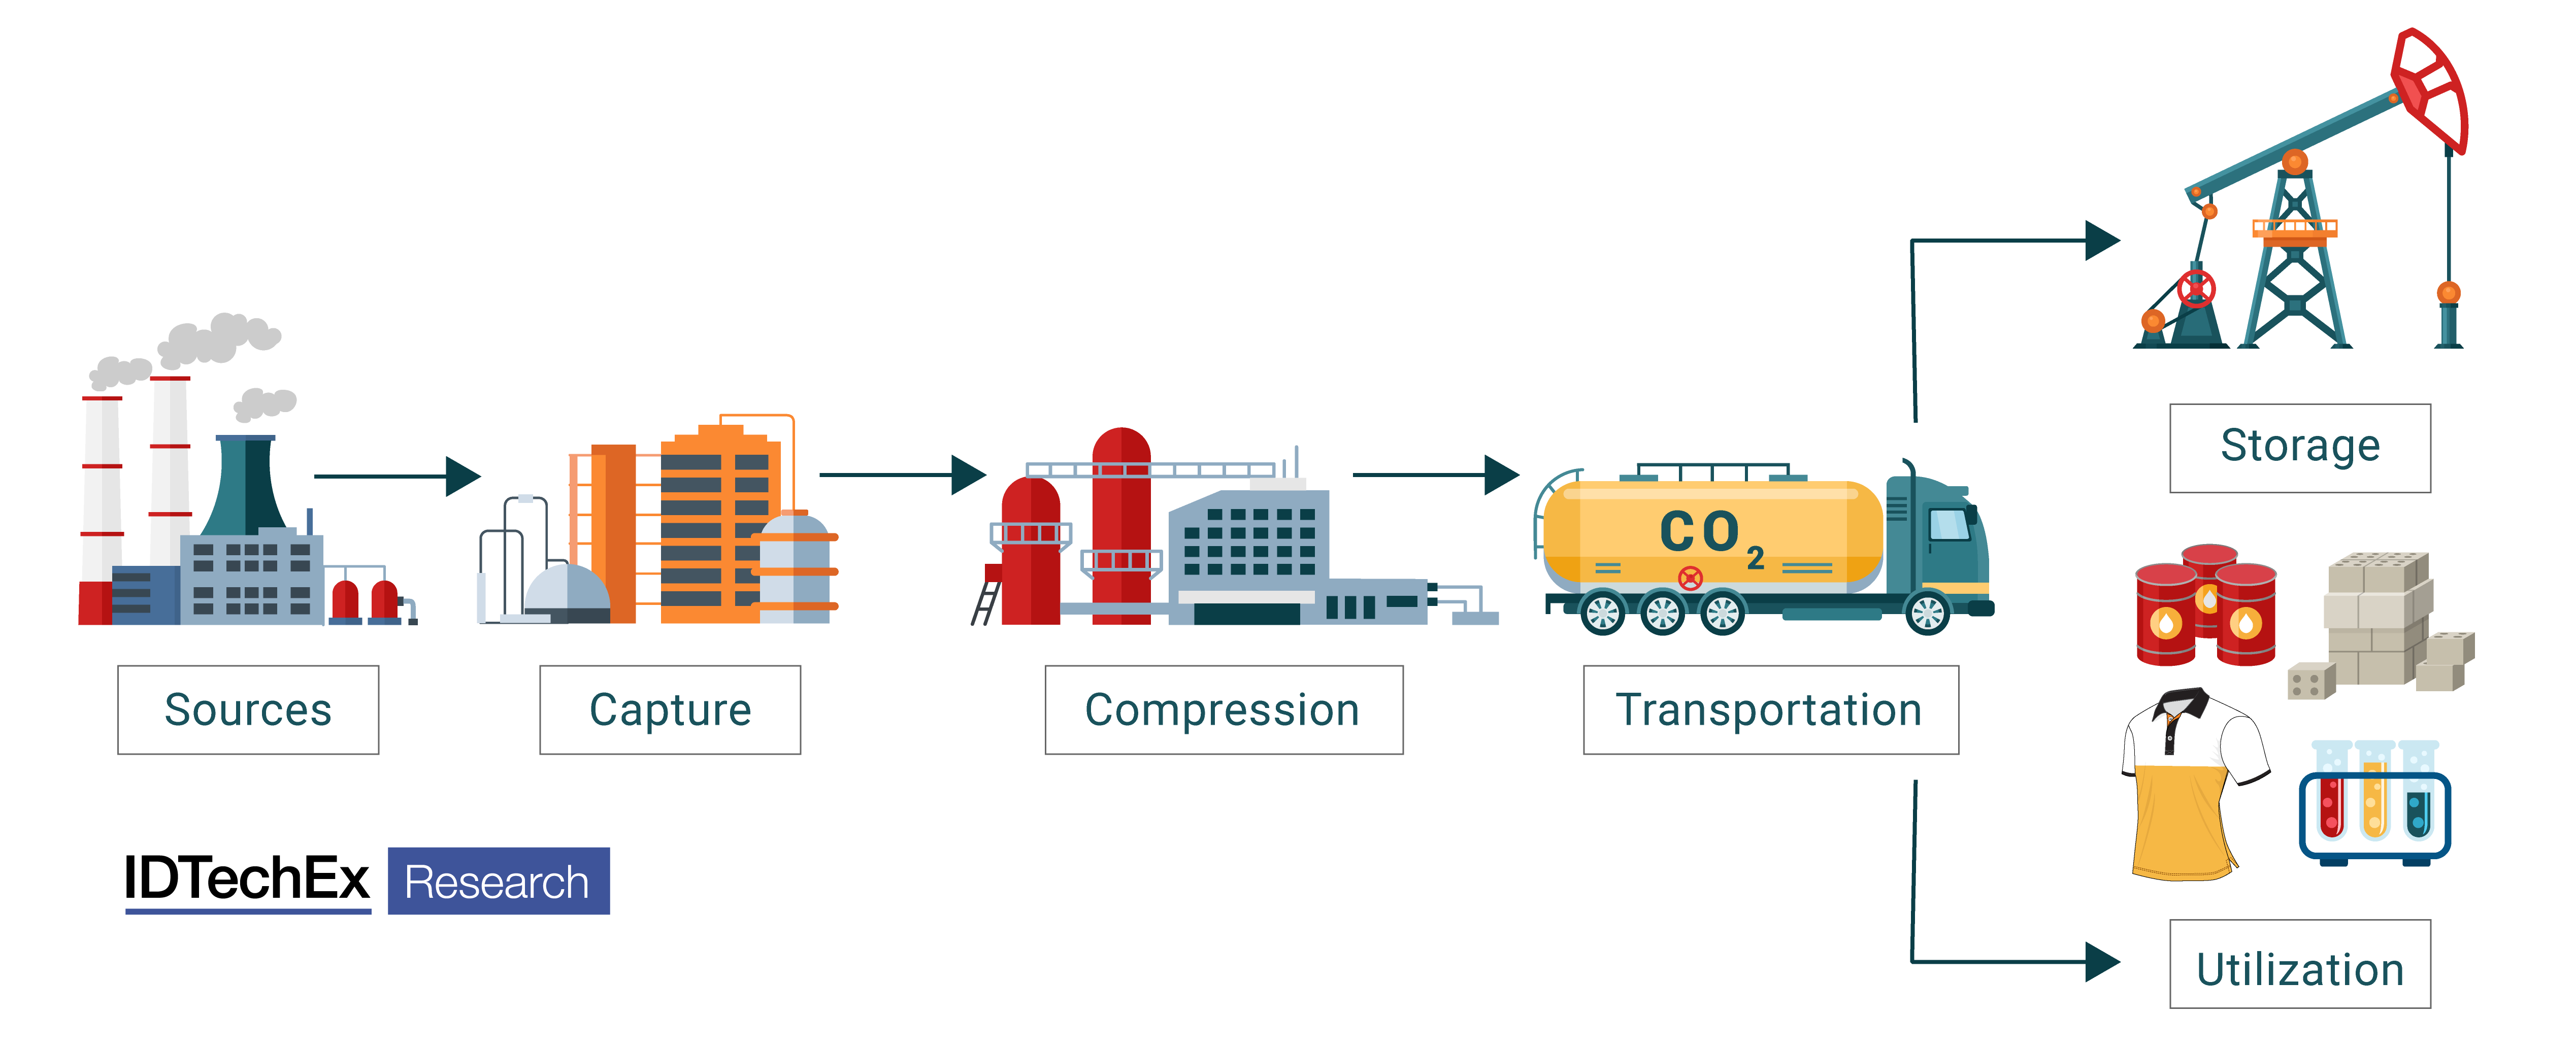 The major steps involved in carbon capture, utilization, and storage (CCUS). Source: IDTechEx – 